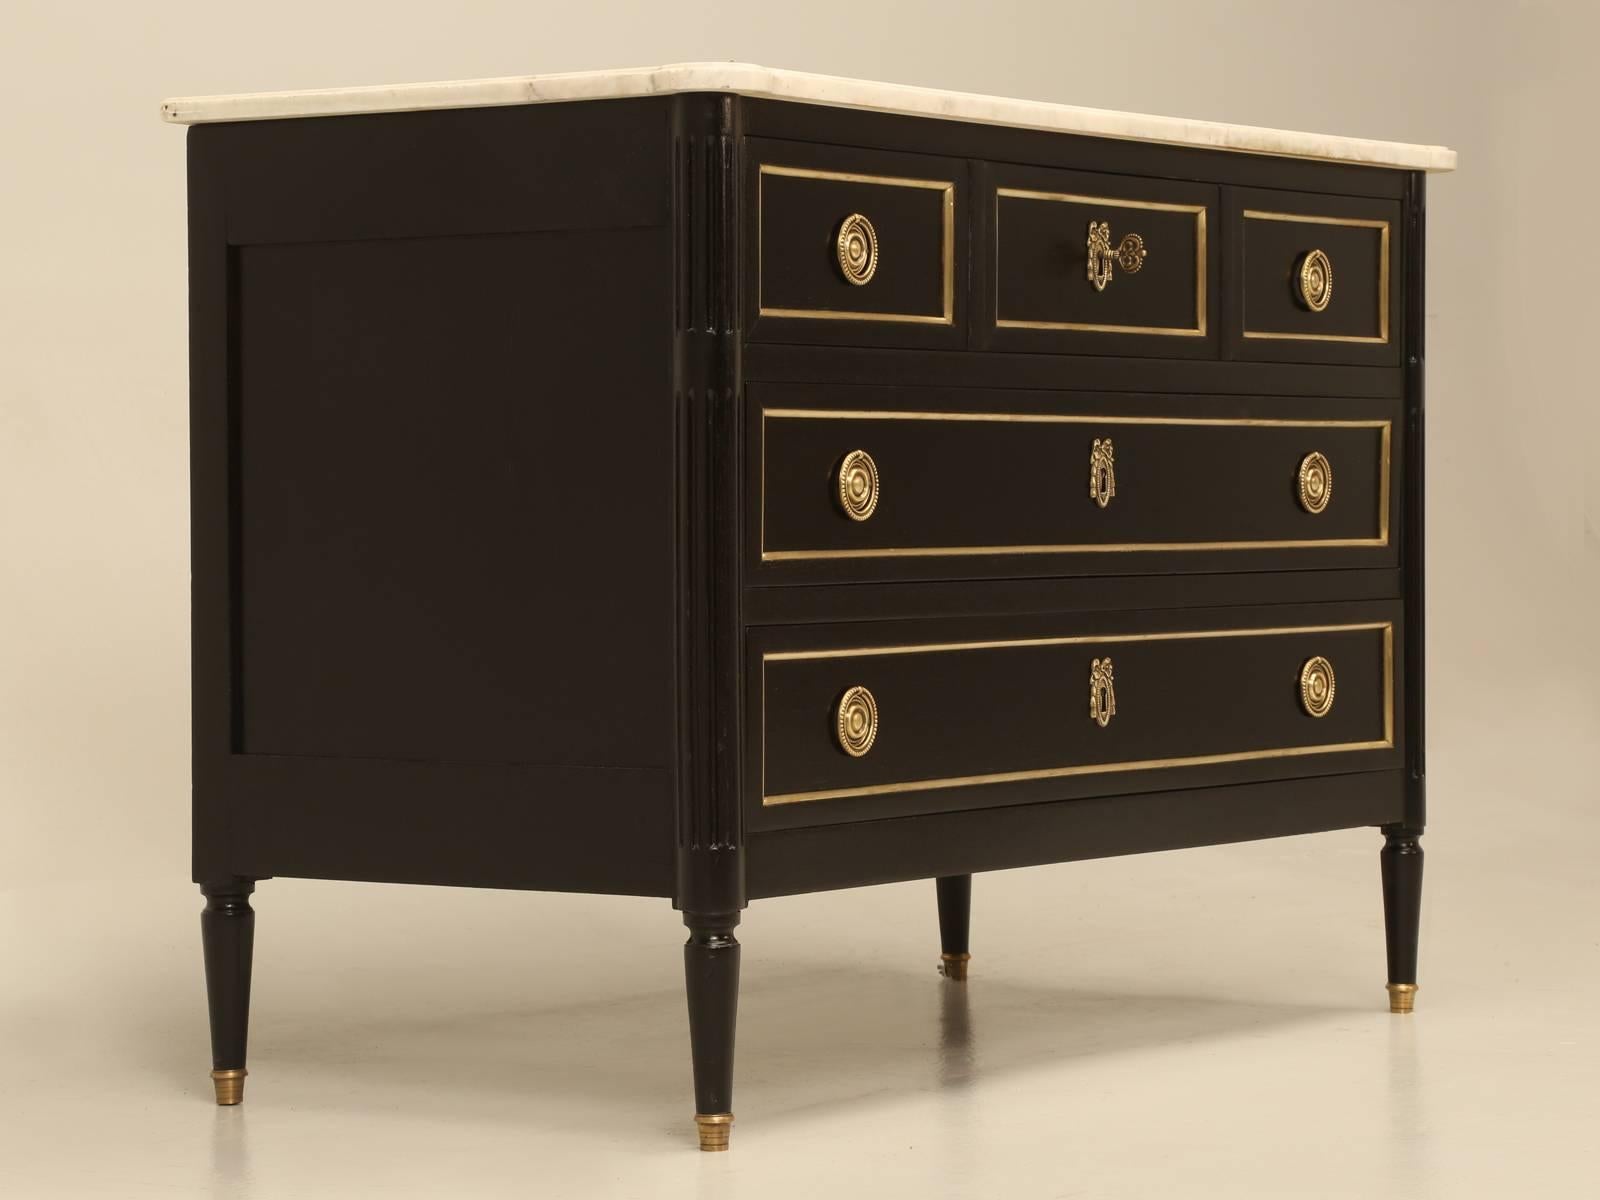 Antique turn-of-the-century Louis XVI style commode, that was completely hand-stripped without the use of chemicals and carefully ebonized with stains that still allow for the grain of the mahogany to show through. With the drawers being hand-dove